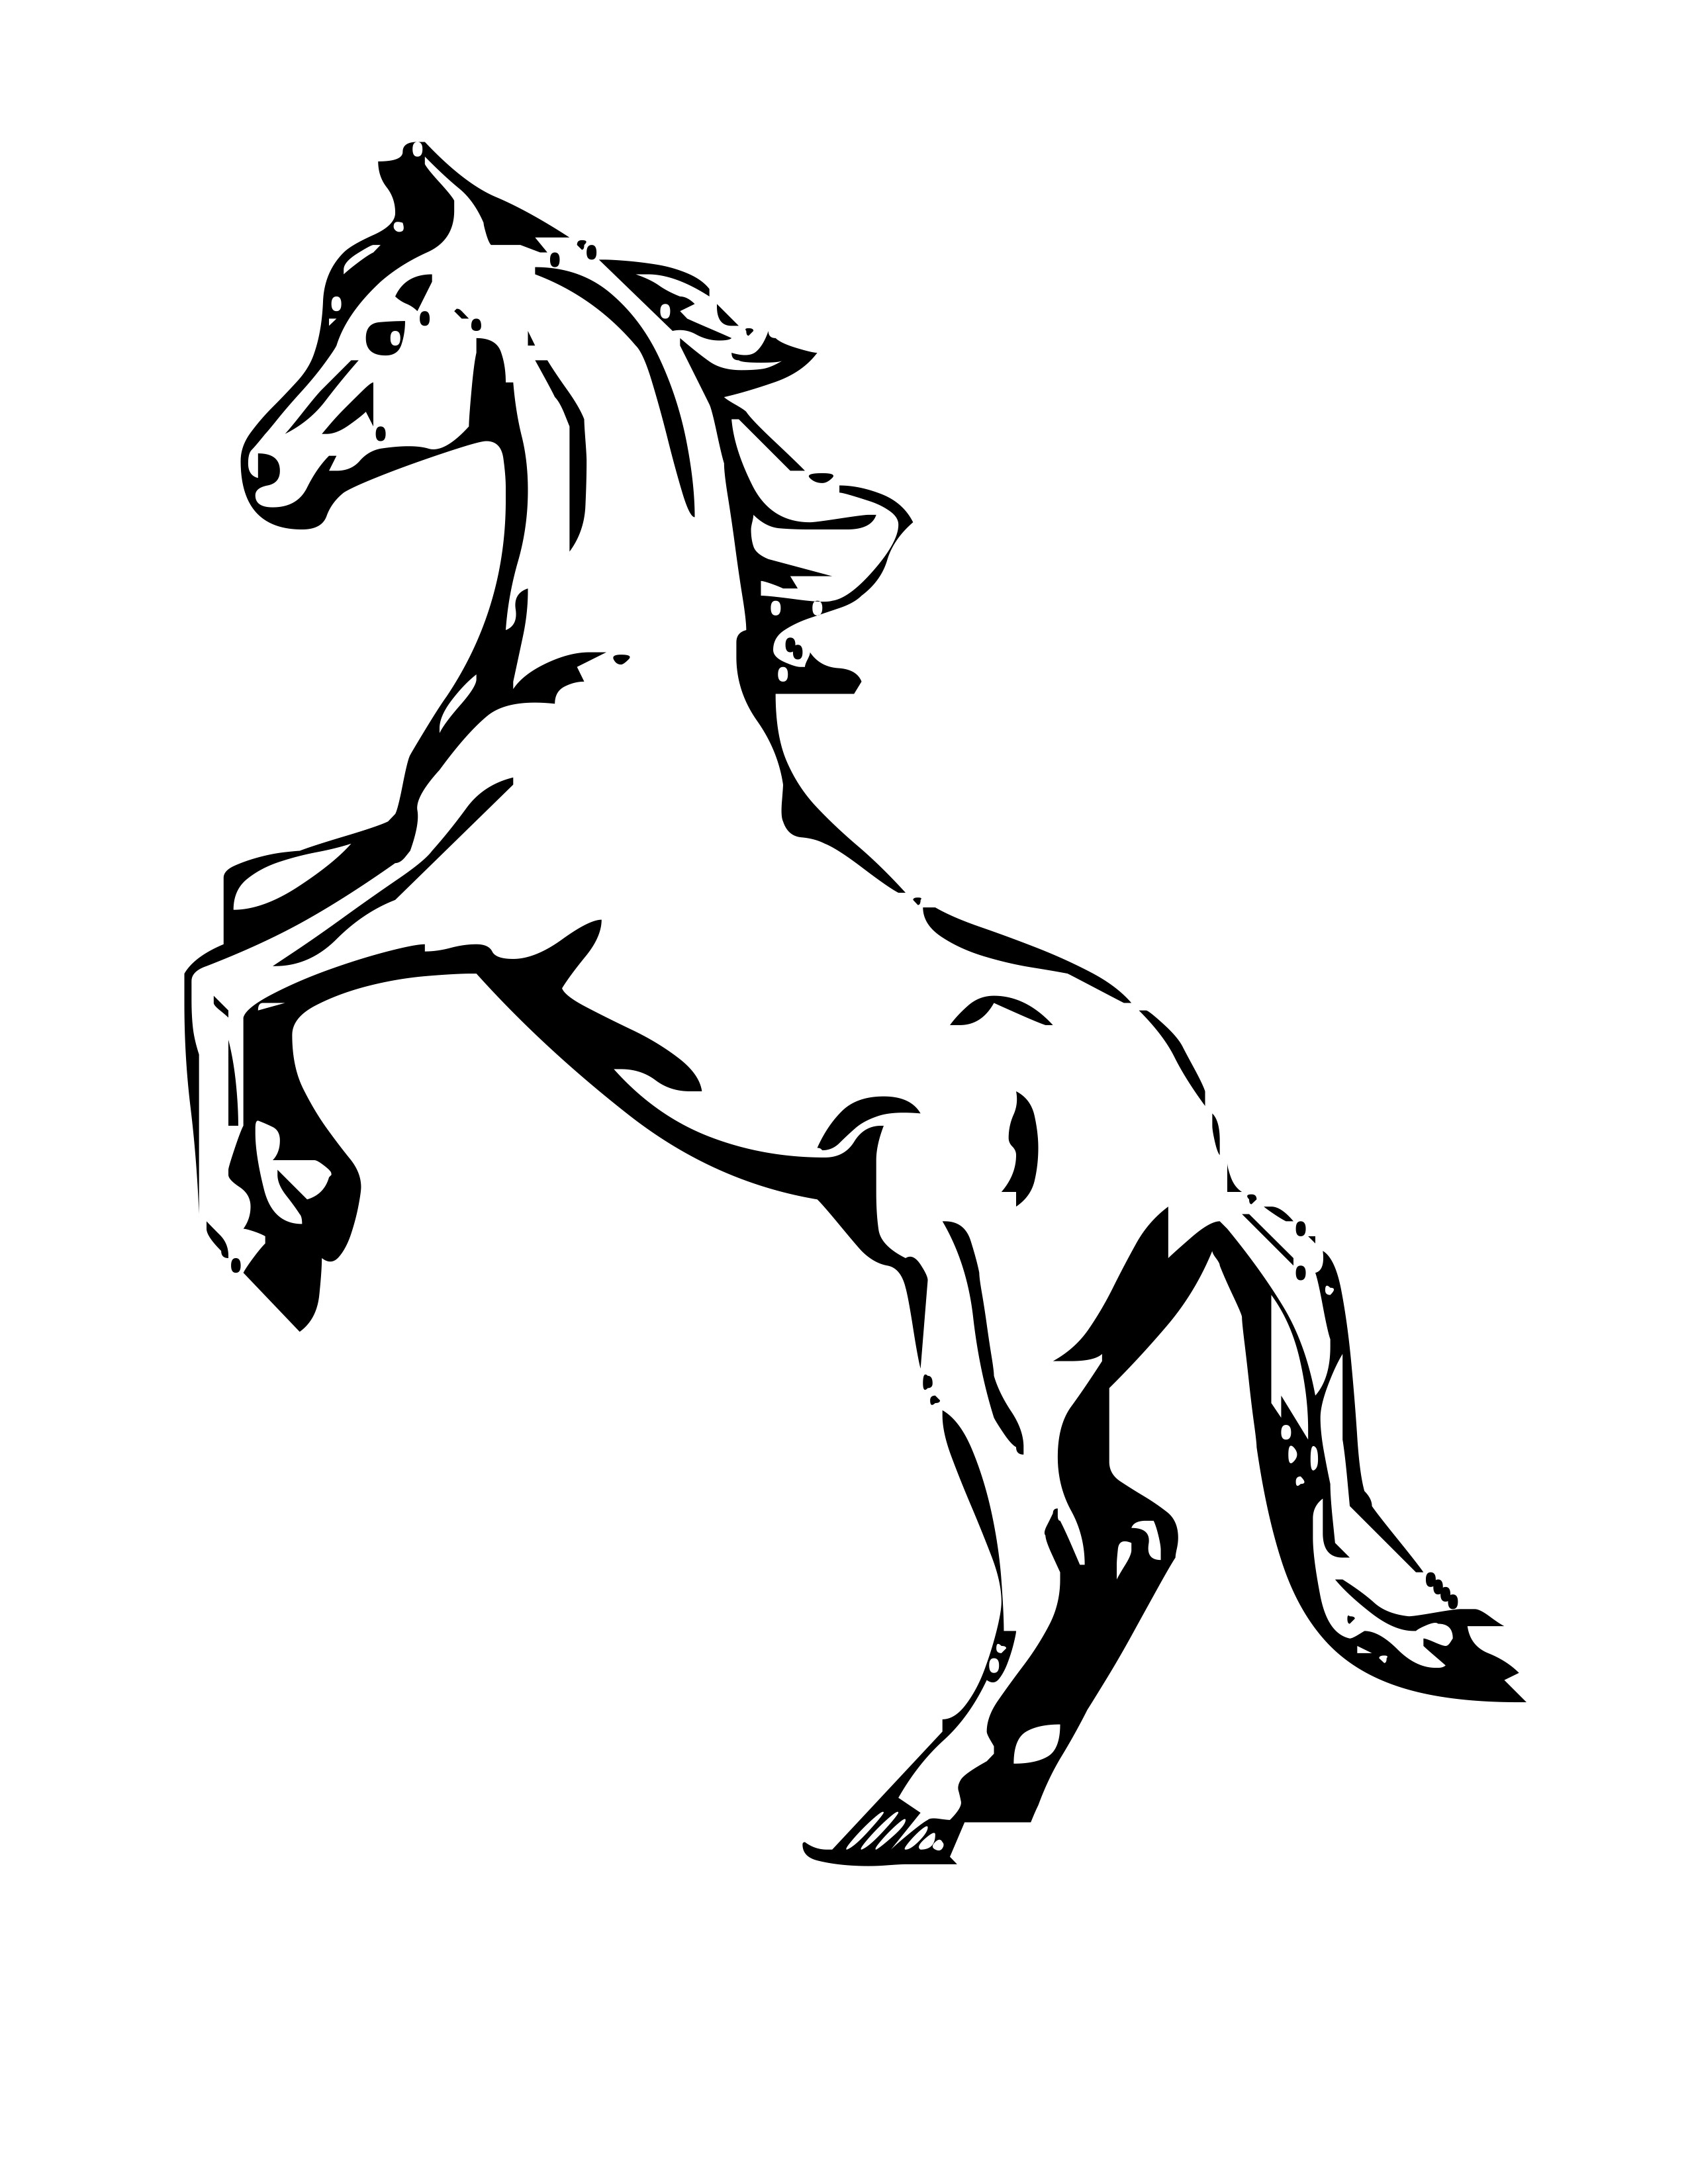 Horse Galloping Coloring Pages at GetColorings.com | Free printable